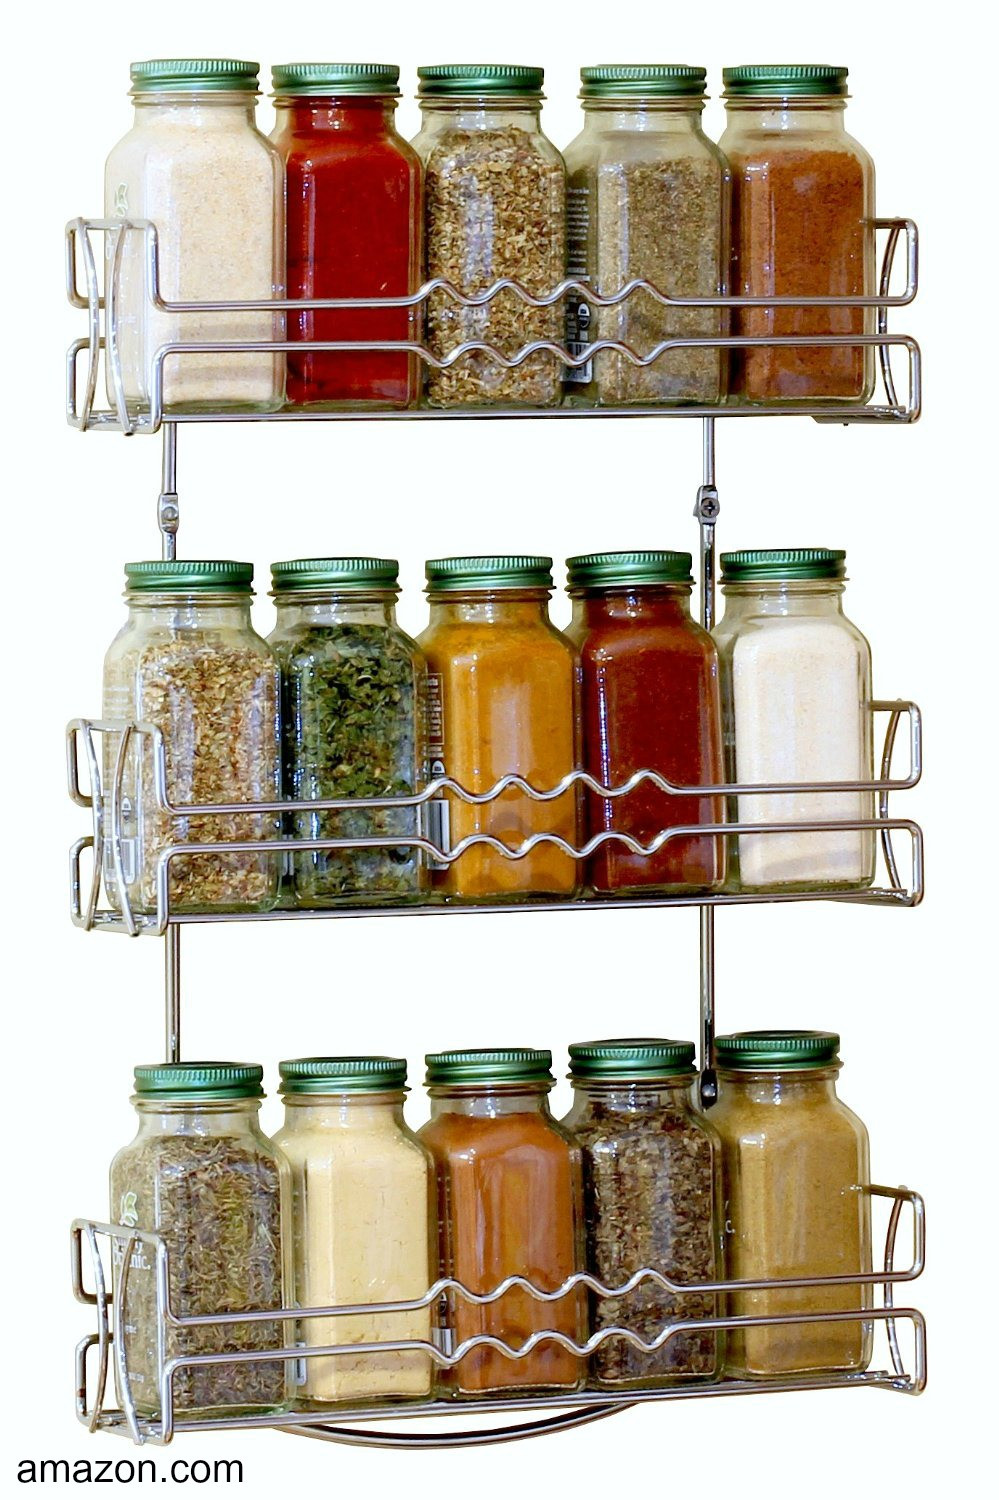 DIY Wall Mount Spice Rack
 Time to Spice Things Up